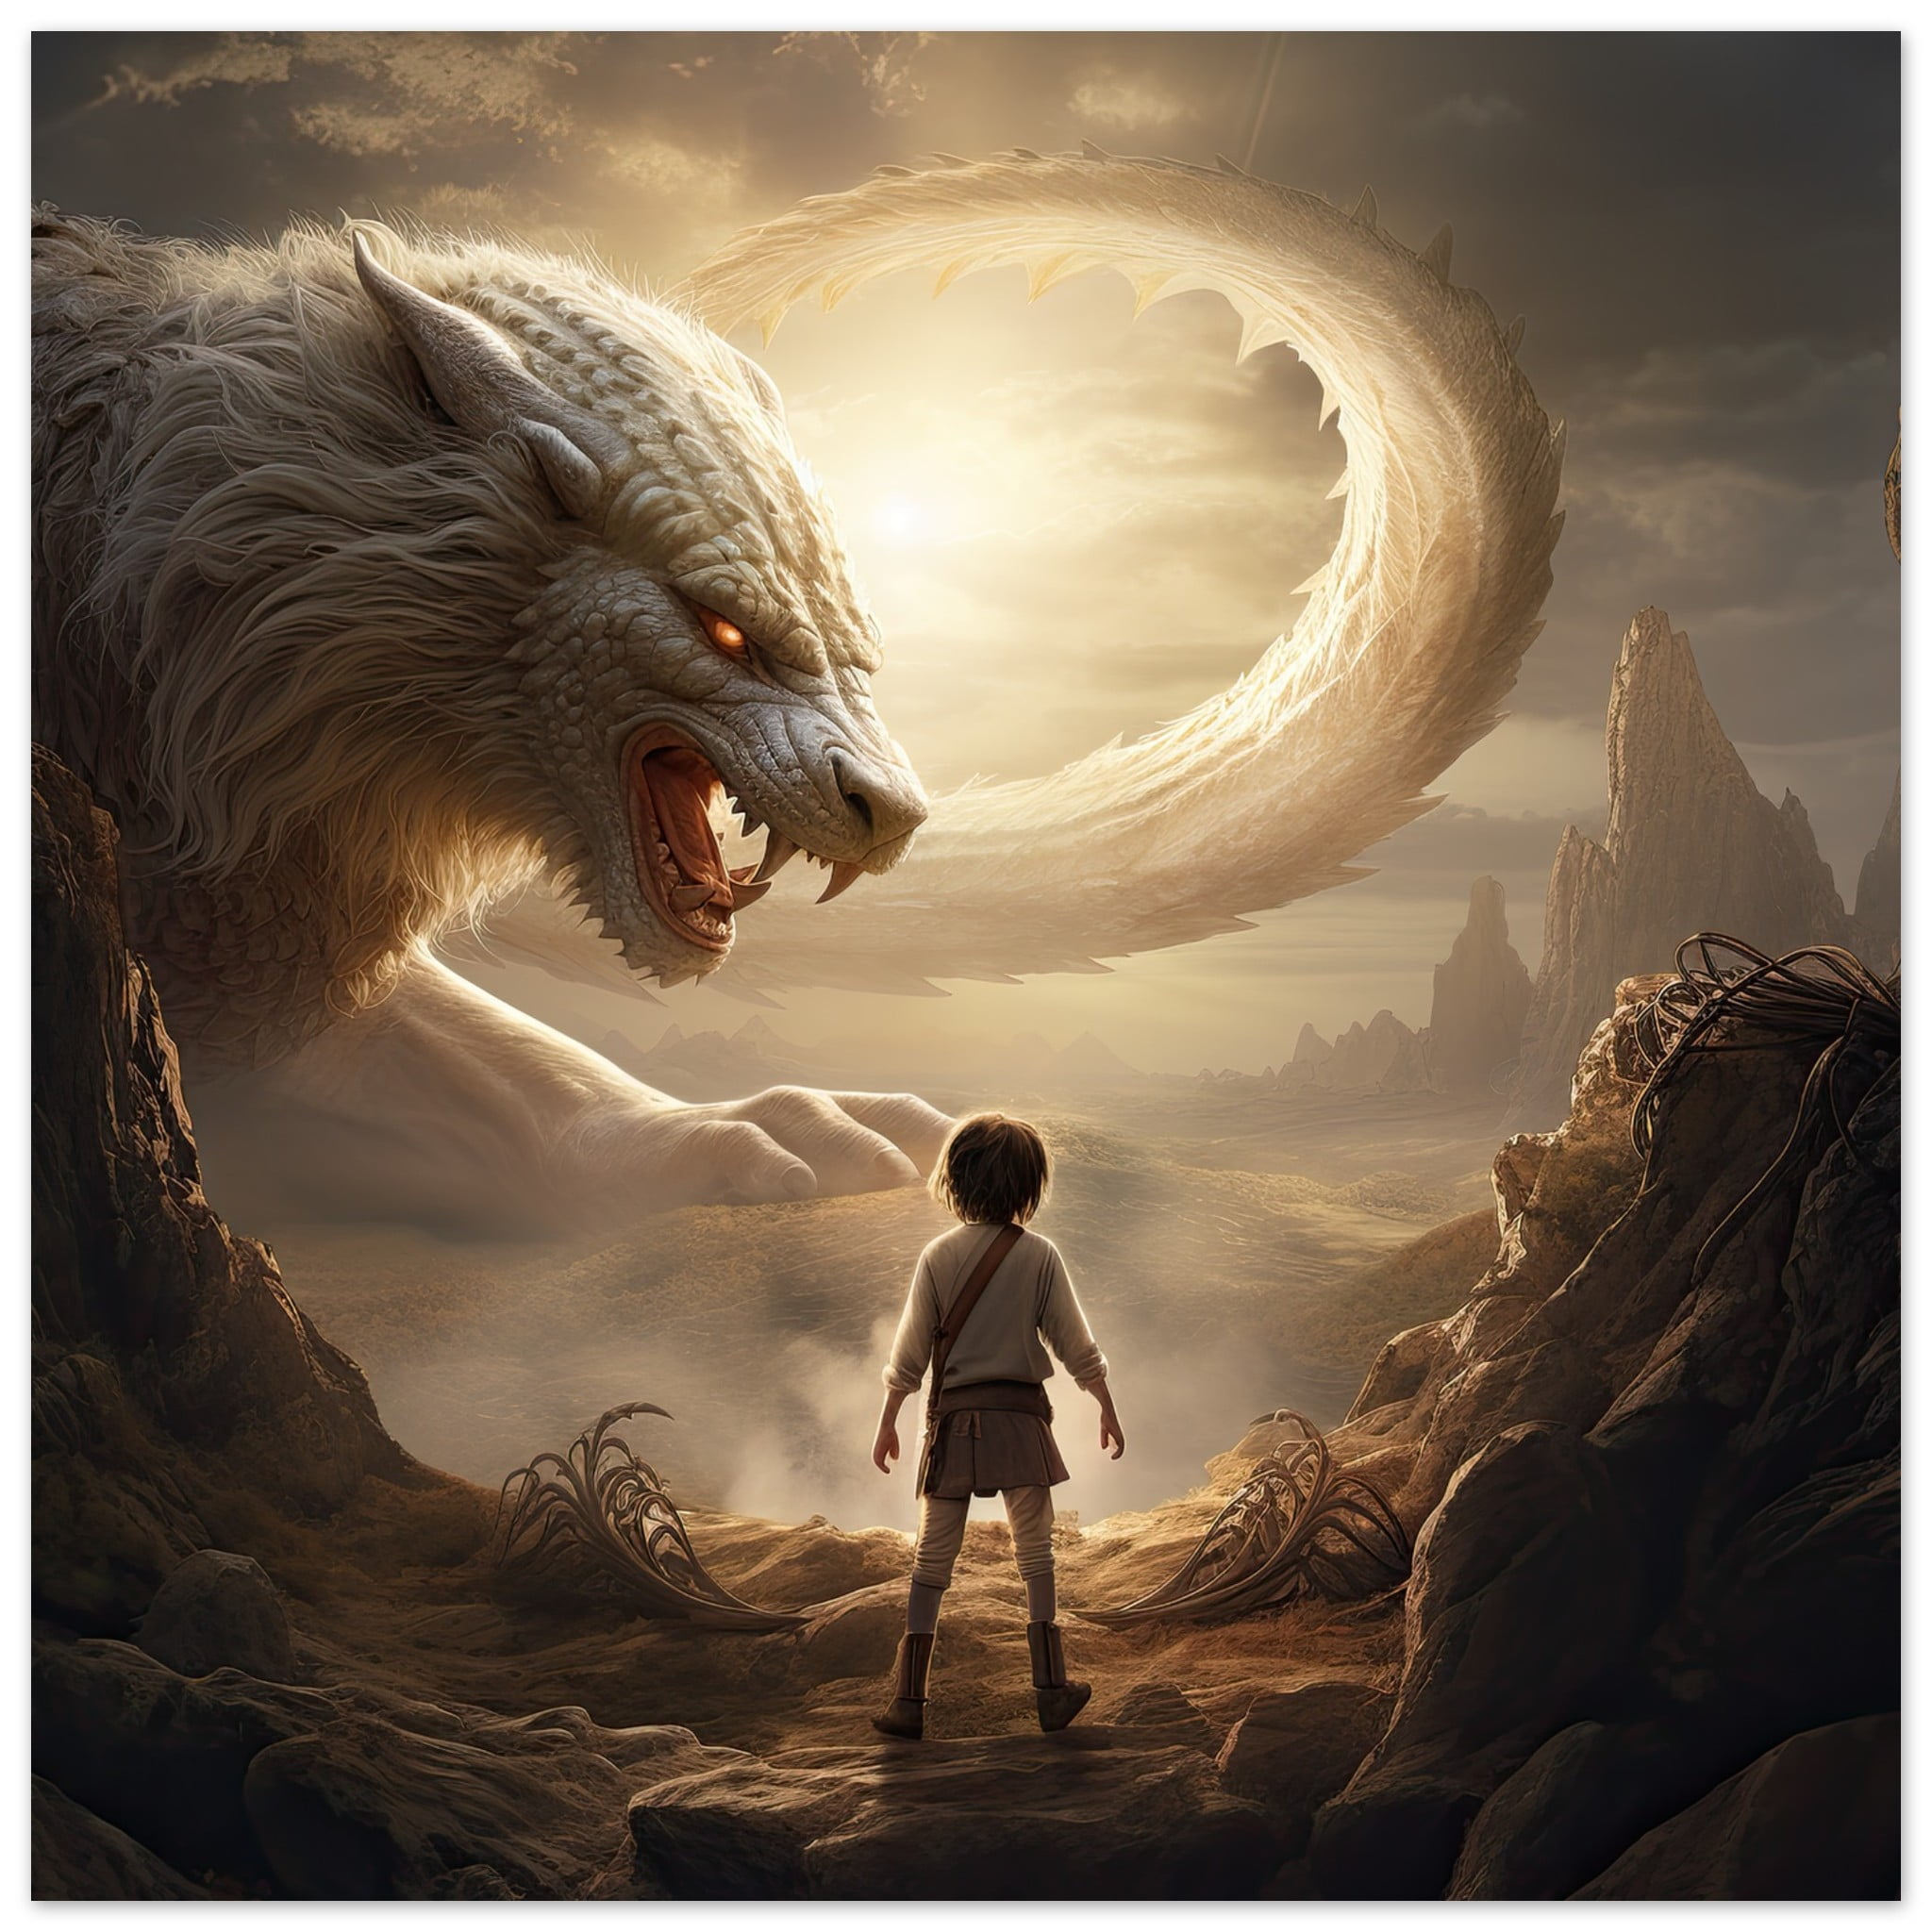 The Boy and the Chimera Art Poster – 45×45 cm / 18×18″